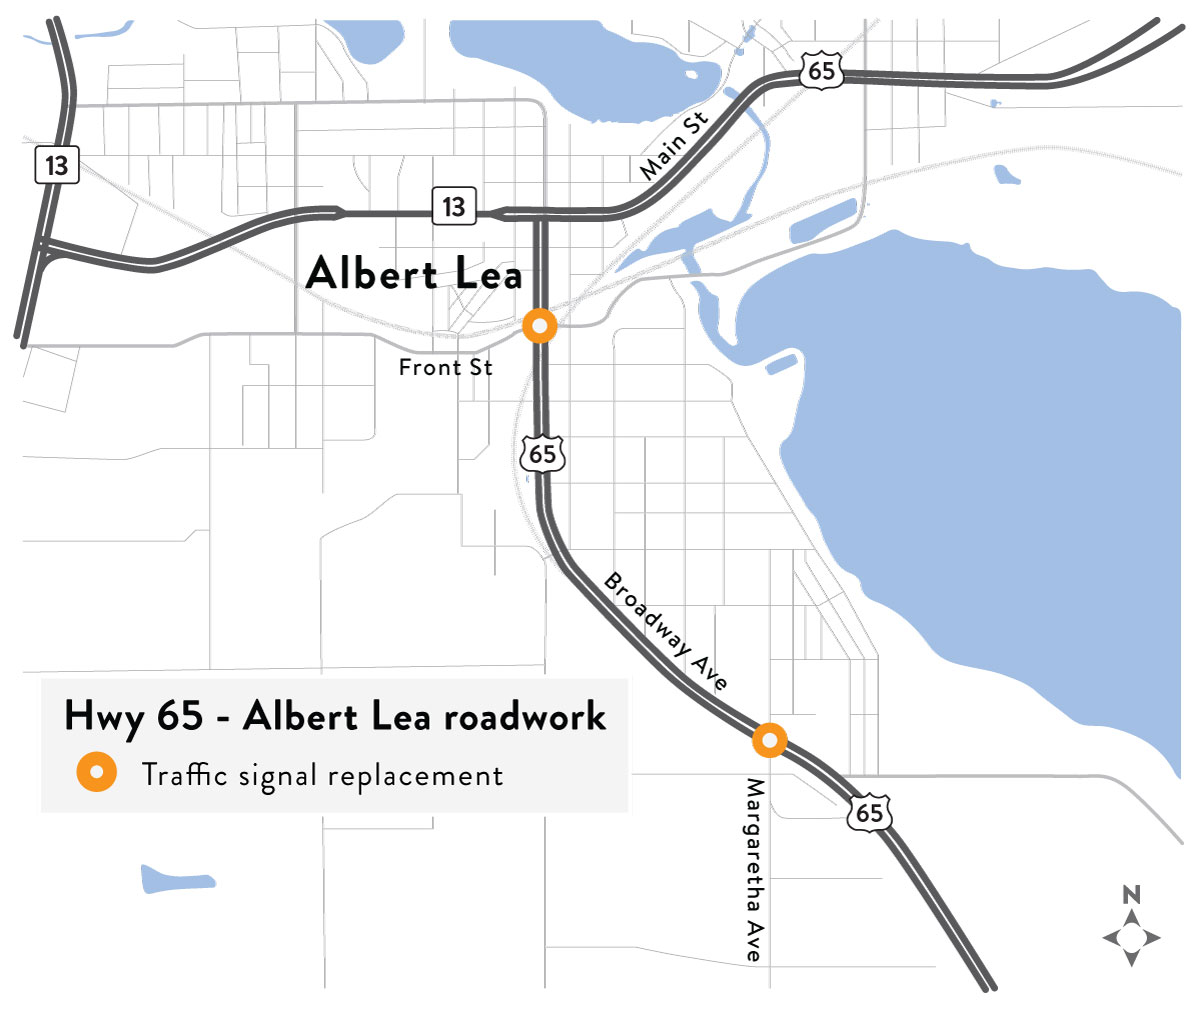 Location of signal replacements in Albert Lea